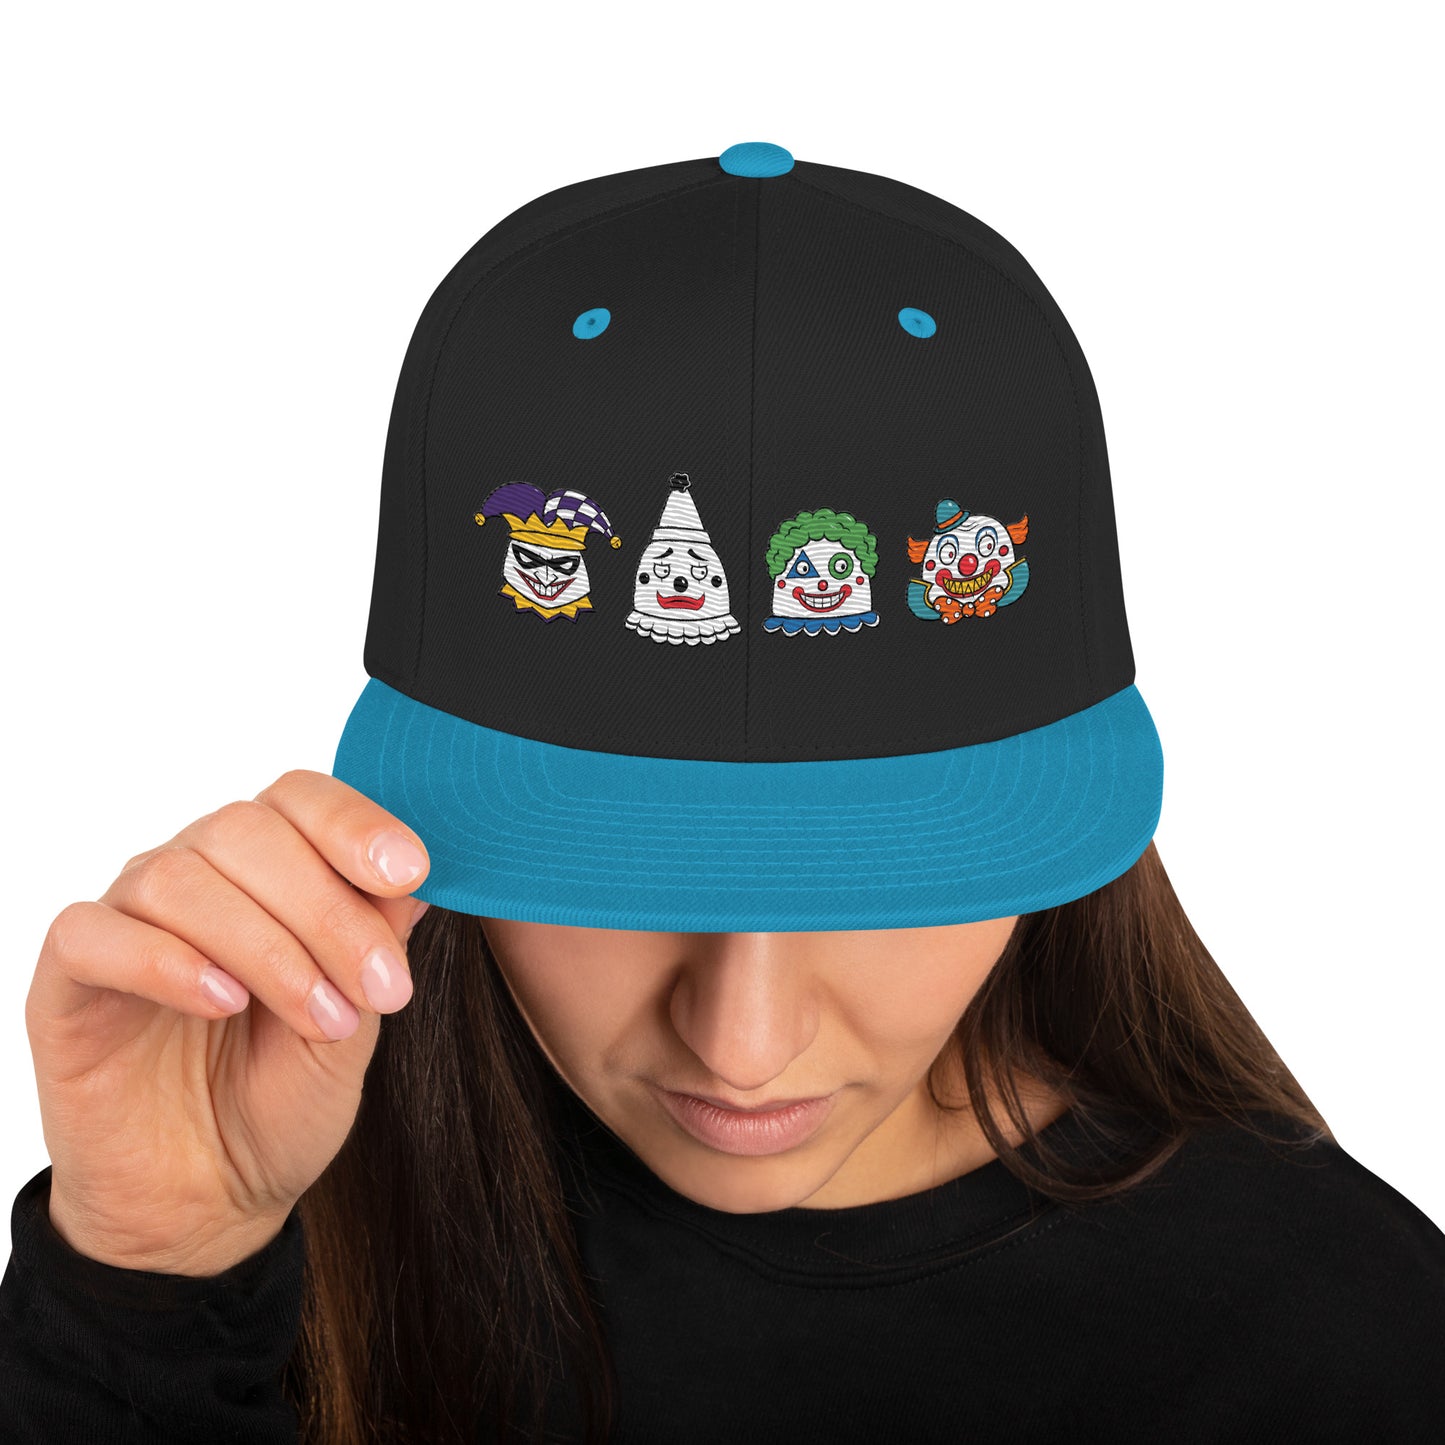 Send in the Clowns - Snapback Hat